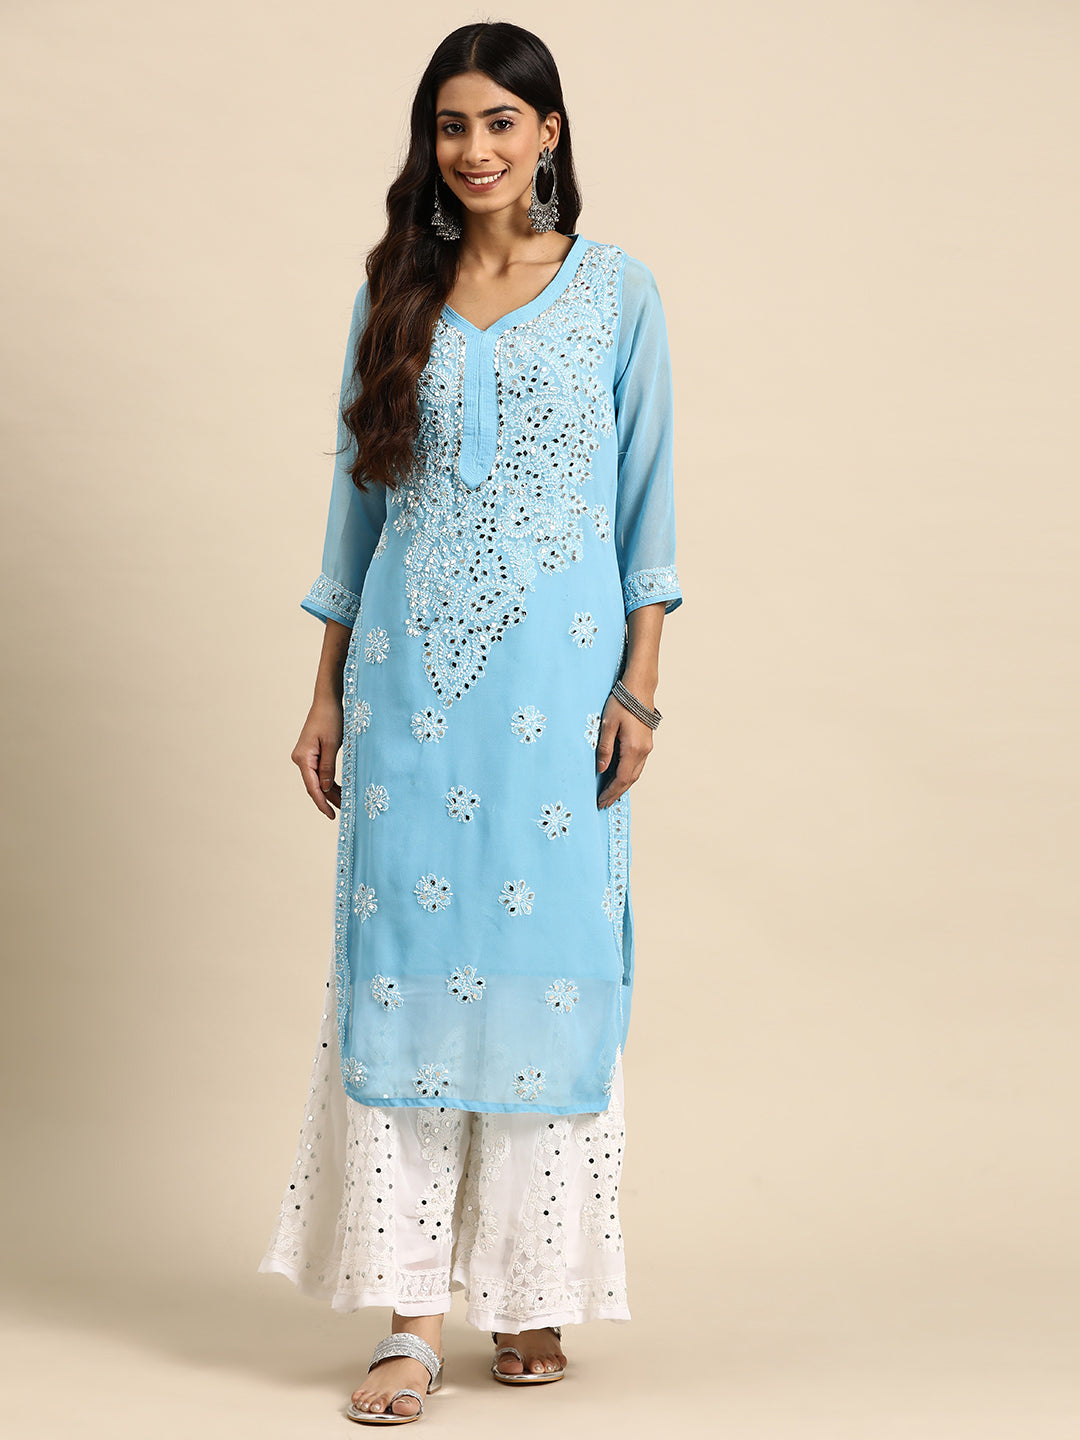 LCA Chikan Handicraft Lucknowi Latest Chiffon Kurti with Inner Lenth-44  Sleeve-3/4 Hand Wash at Rs 950 | Lucknow | ID: 25476799930